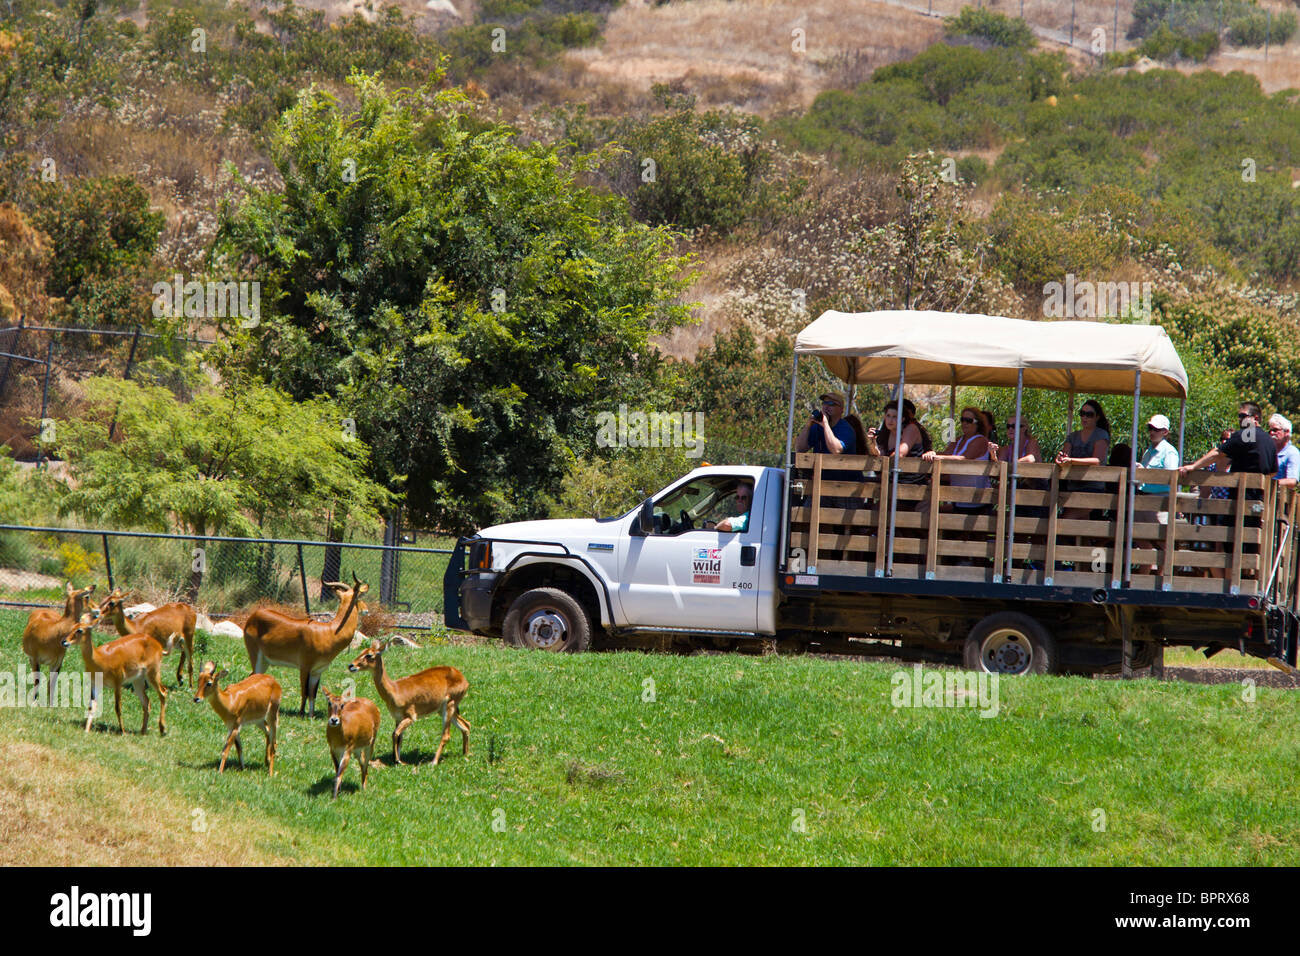 Visitors watch animals from an open truck, San Diego Zoo Safari Park, Escondido, California, United States of America Stock Photo